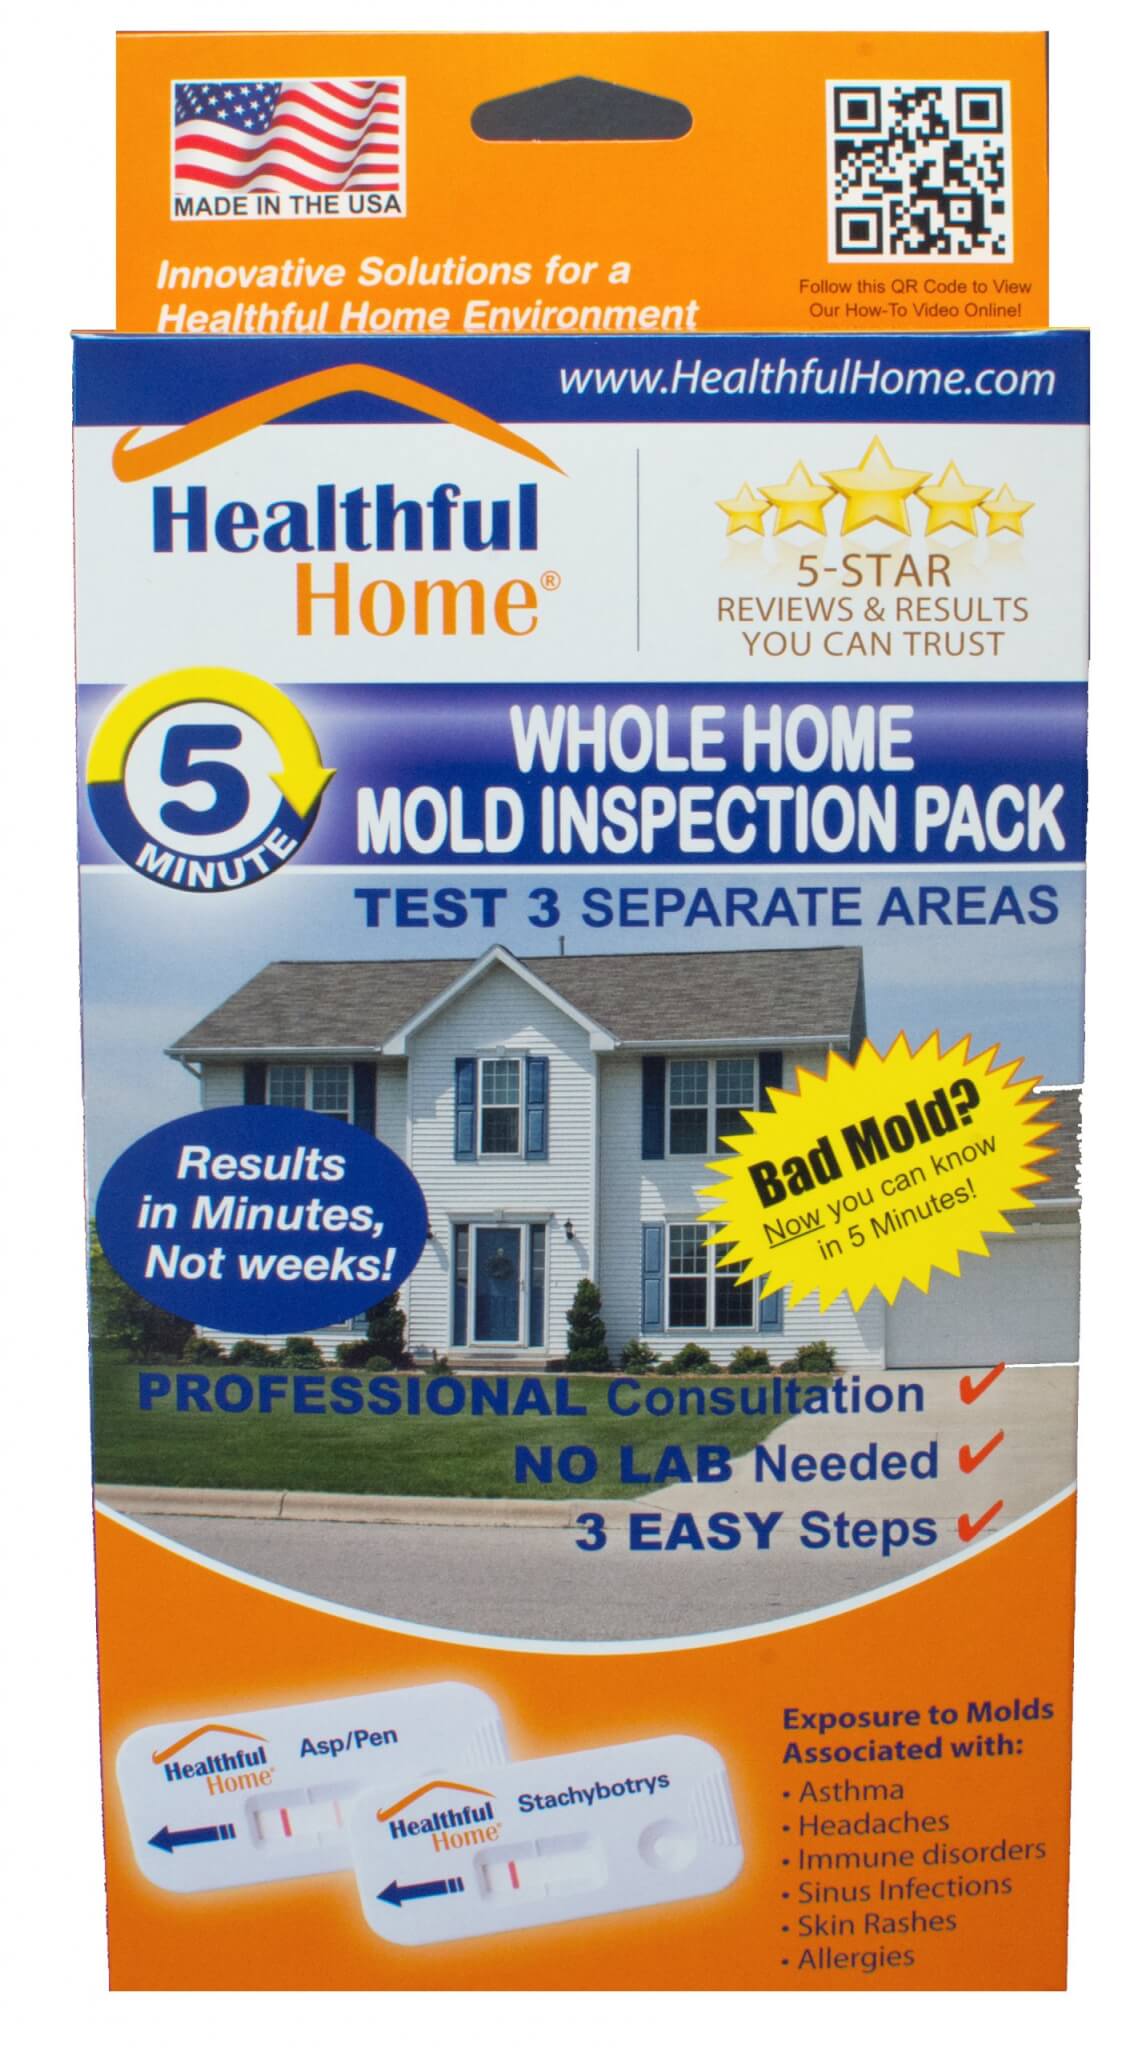 5-Minute Mold Test for the whole house